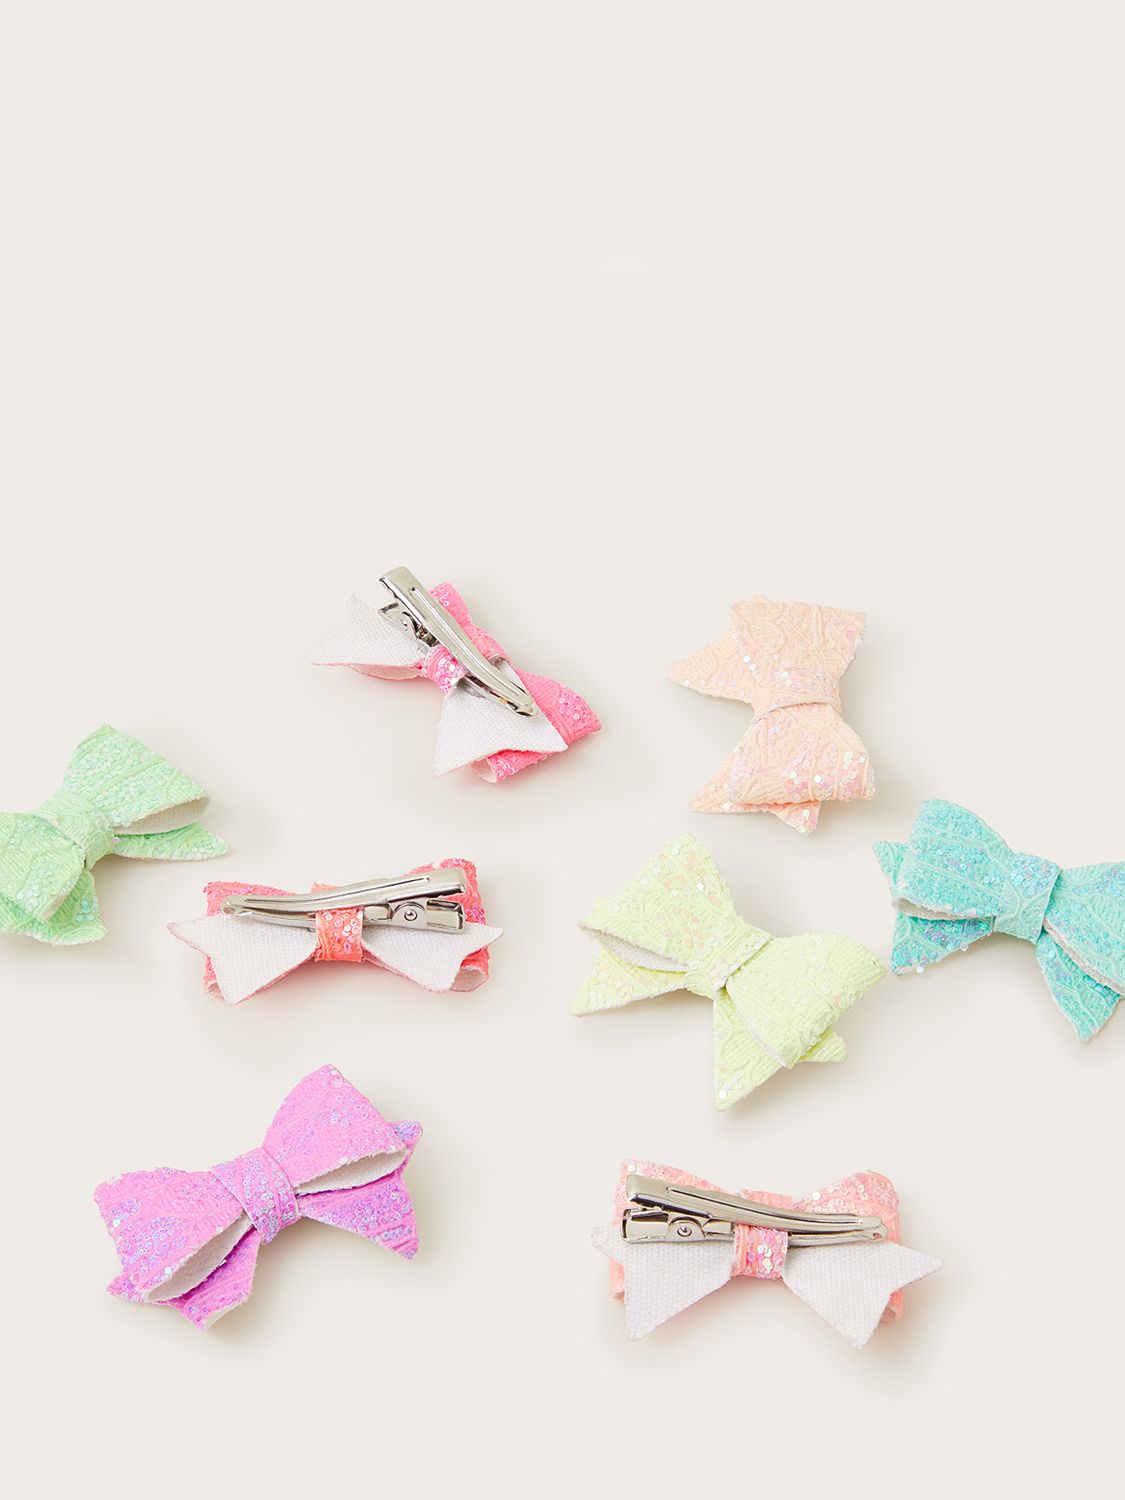 Monsoon Kids' Rain Bow Bright Hair Clips, Pack of 8, Multi, One Size